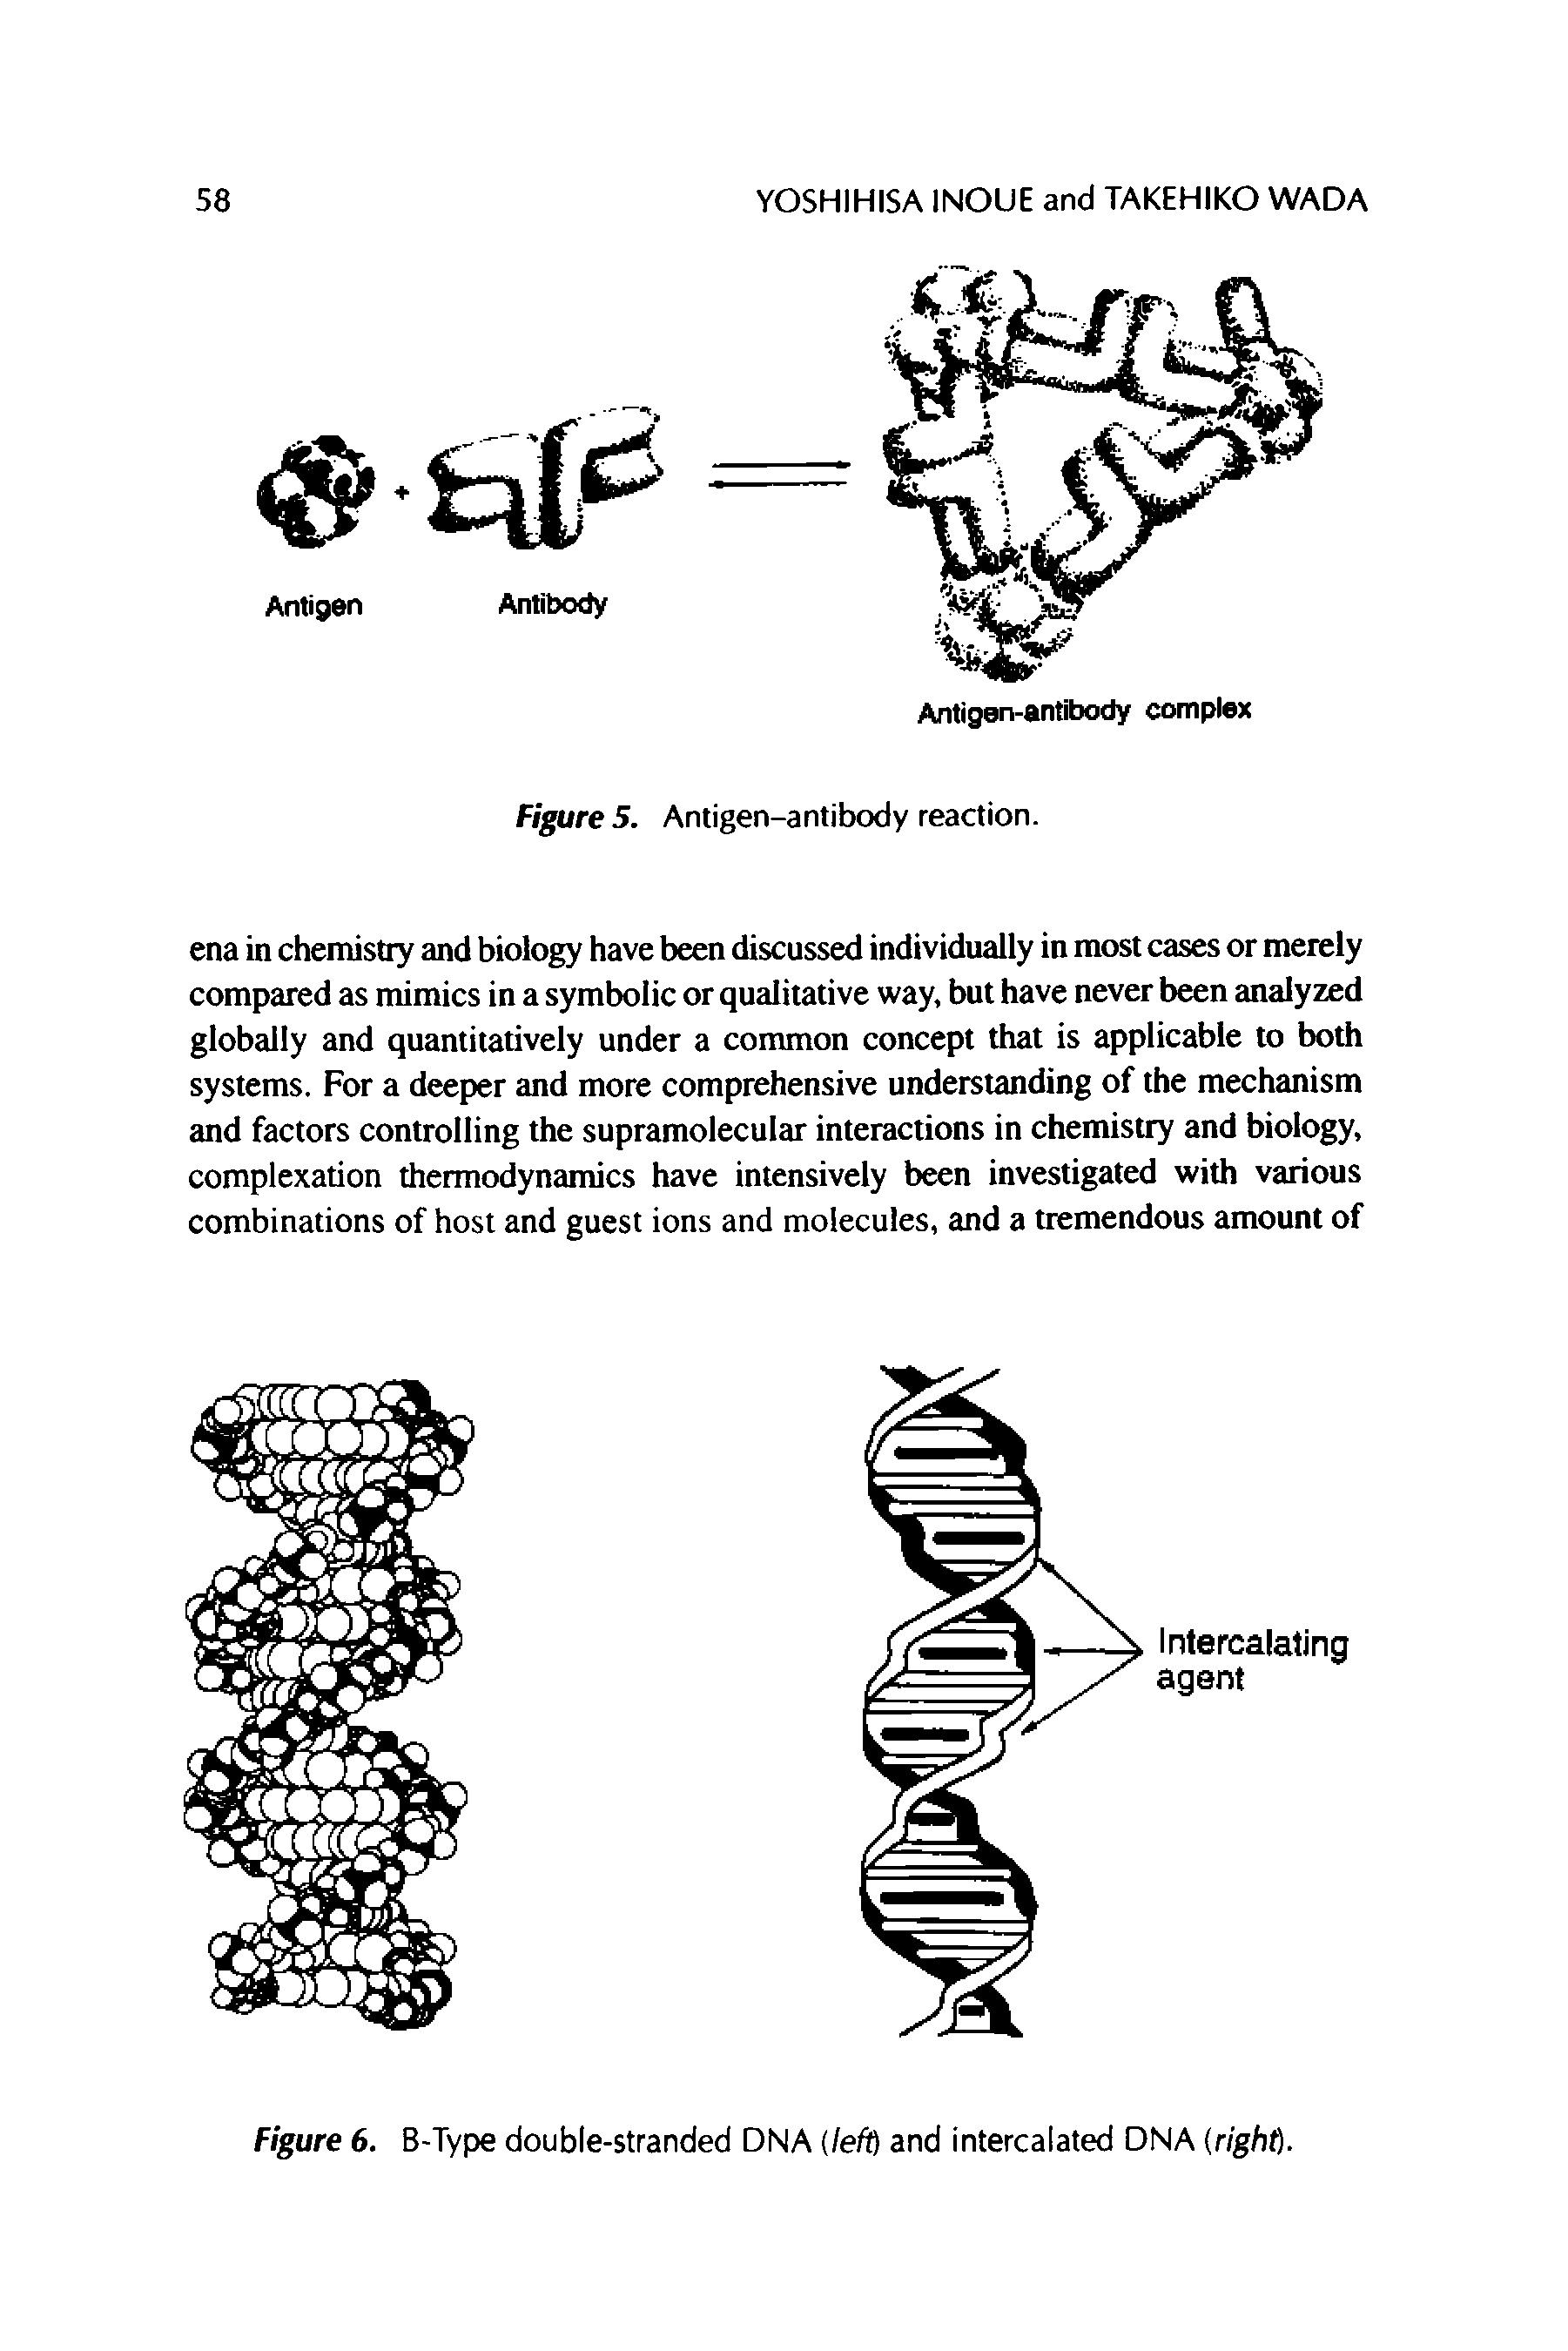 Figure 6. B-Type double-stranded DNA left) and intercalated DNA (right).